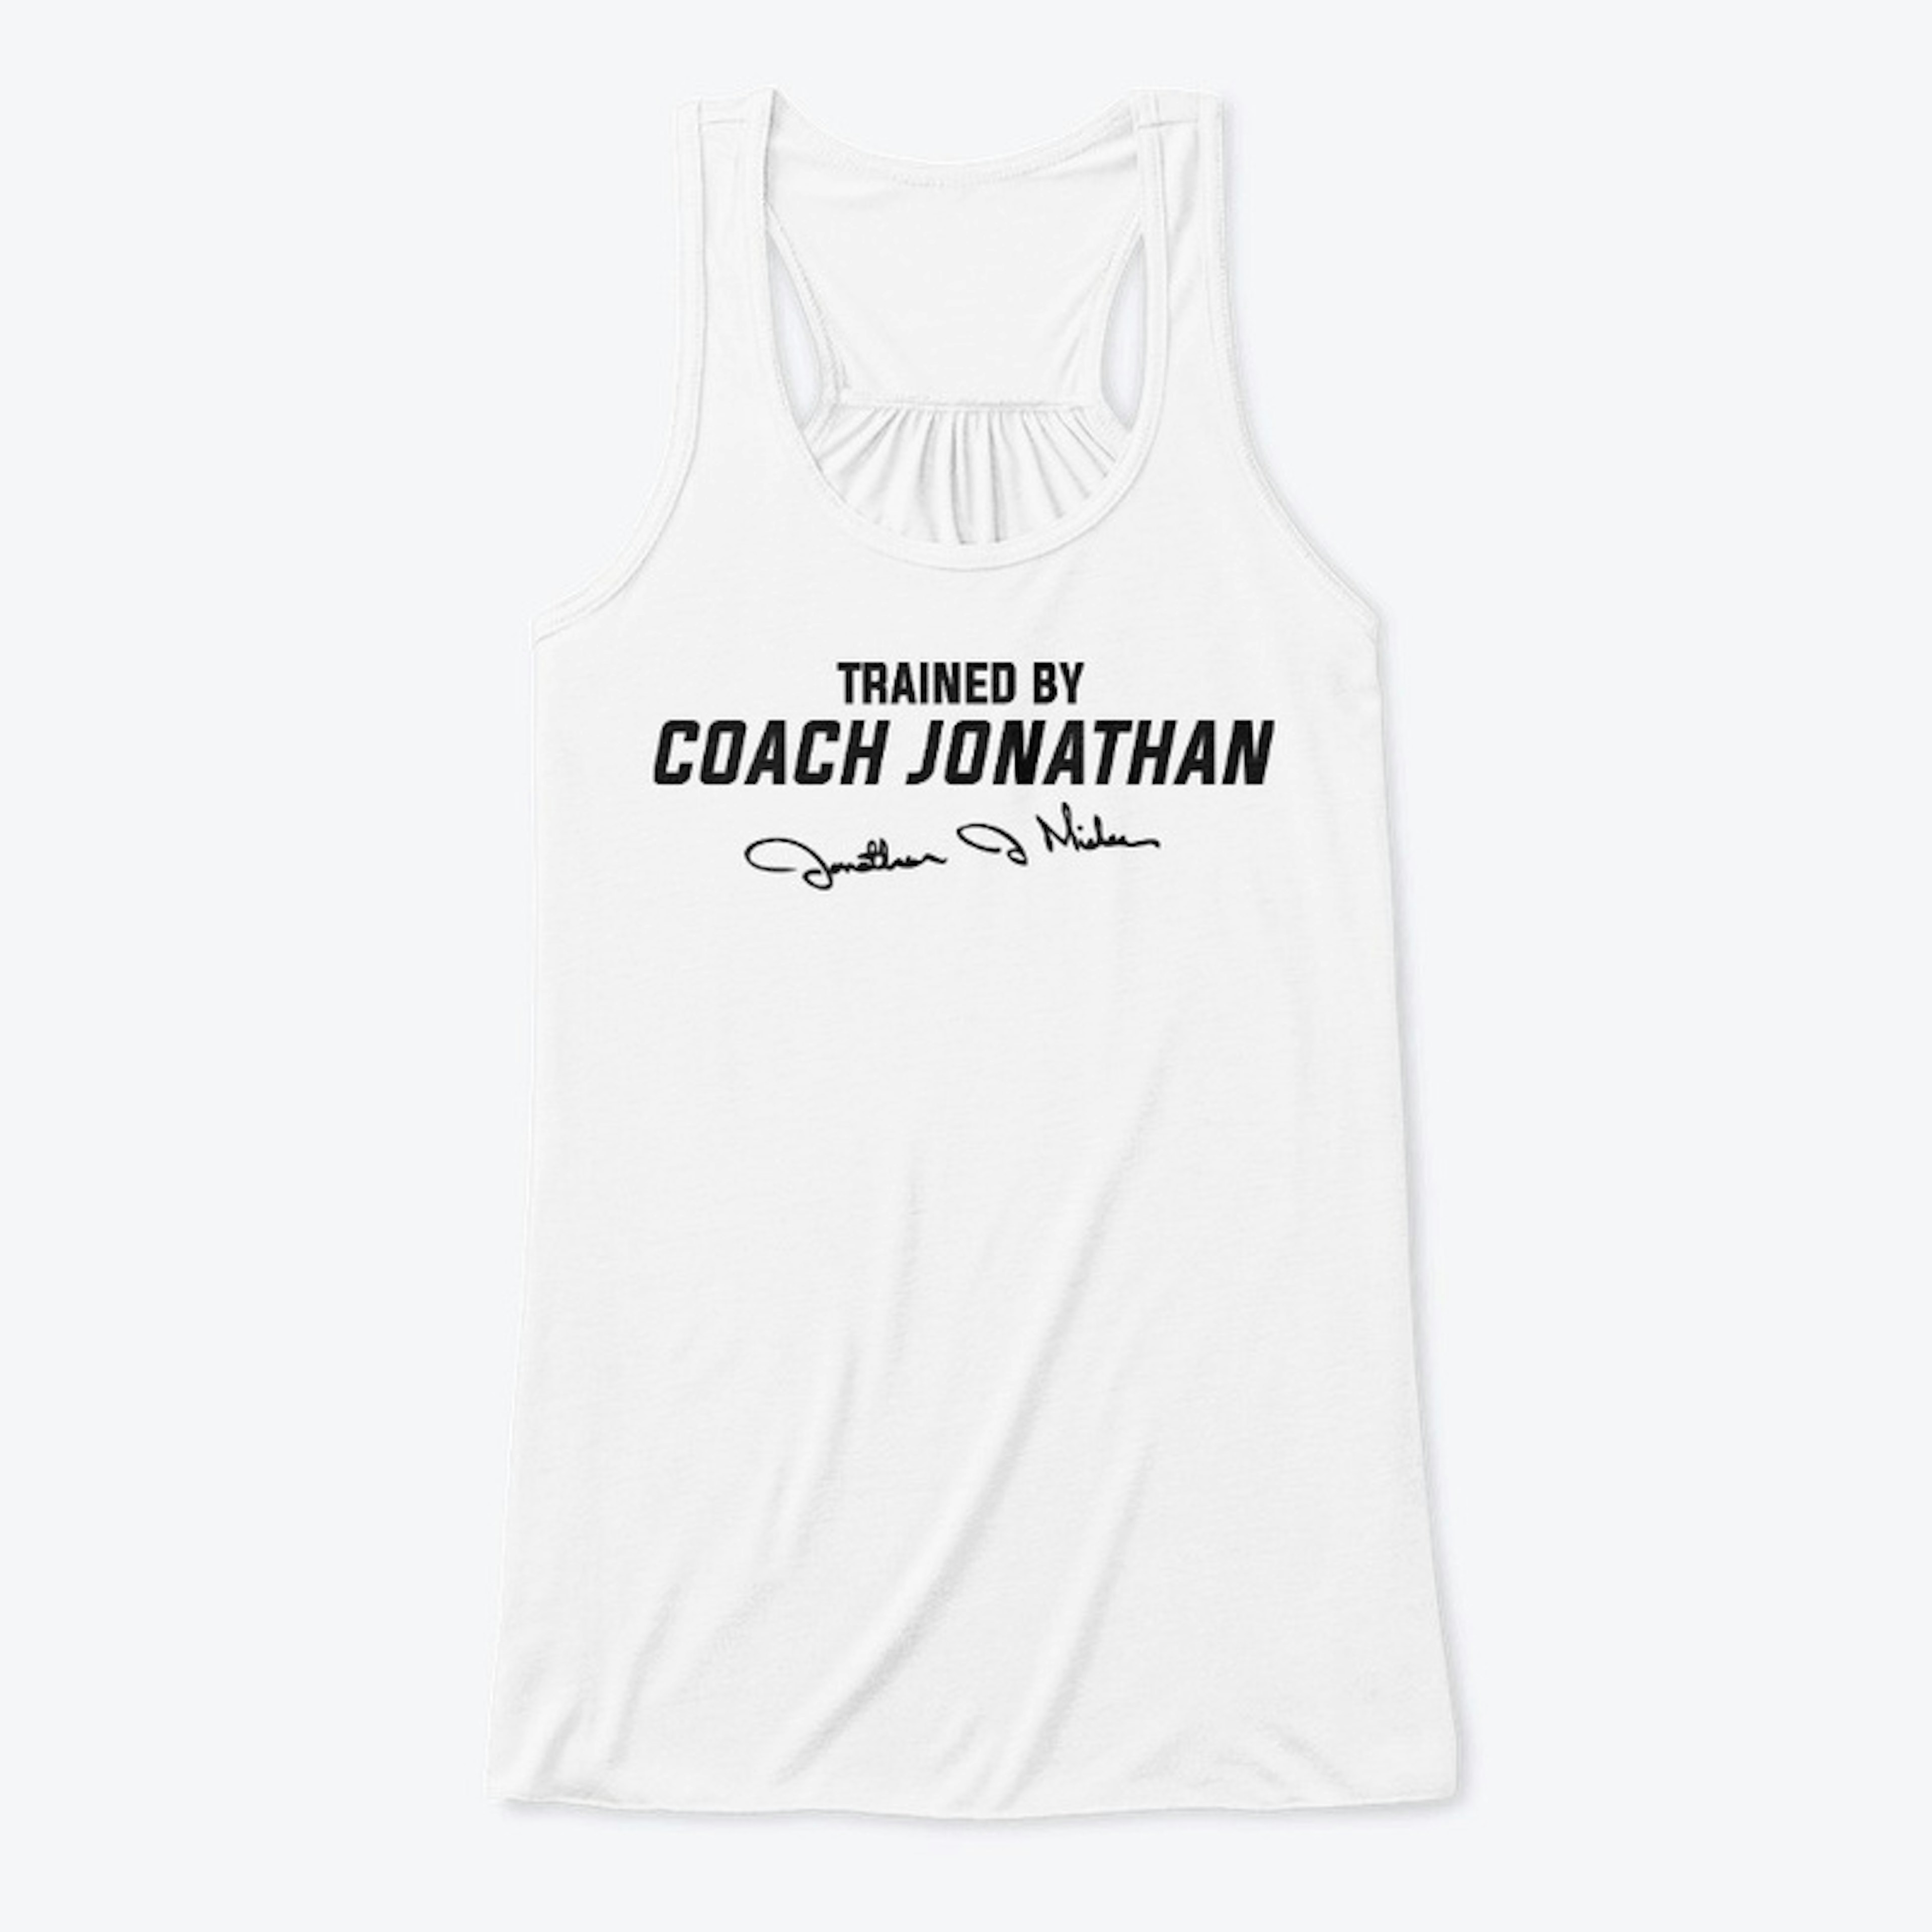 "Trained by J" Signature Top